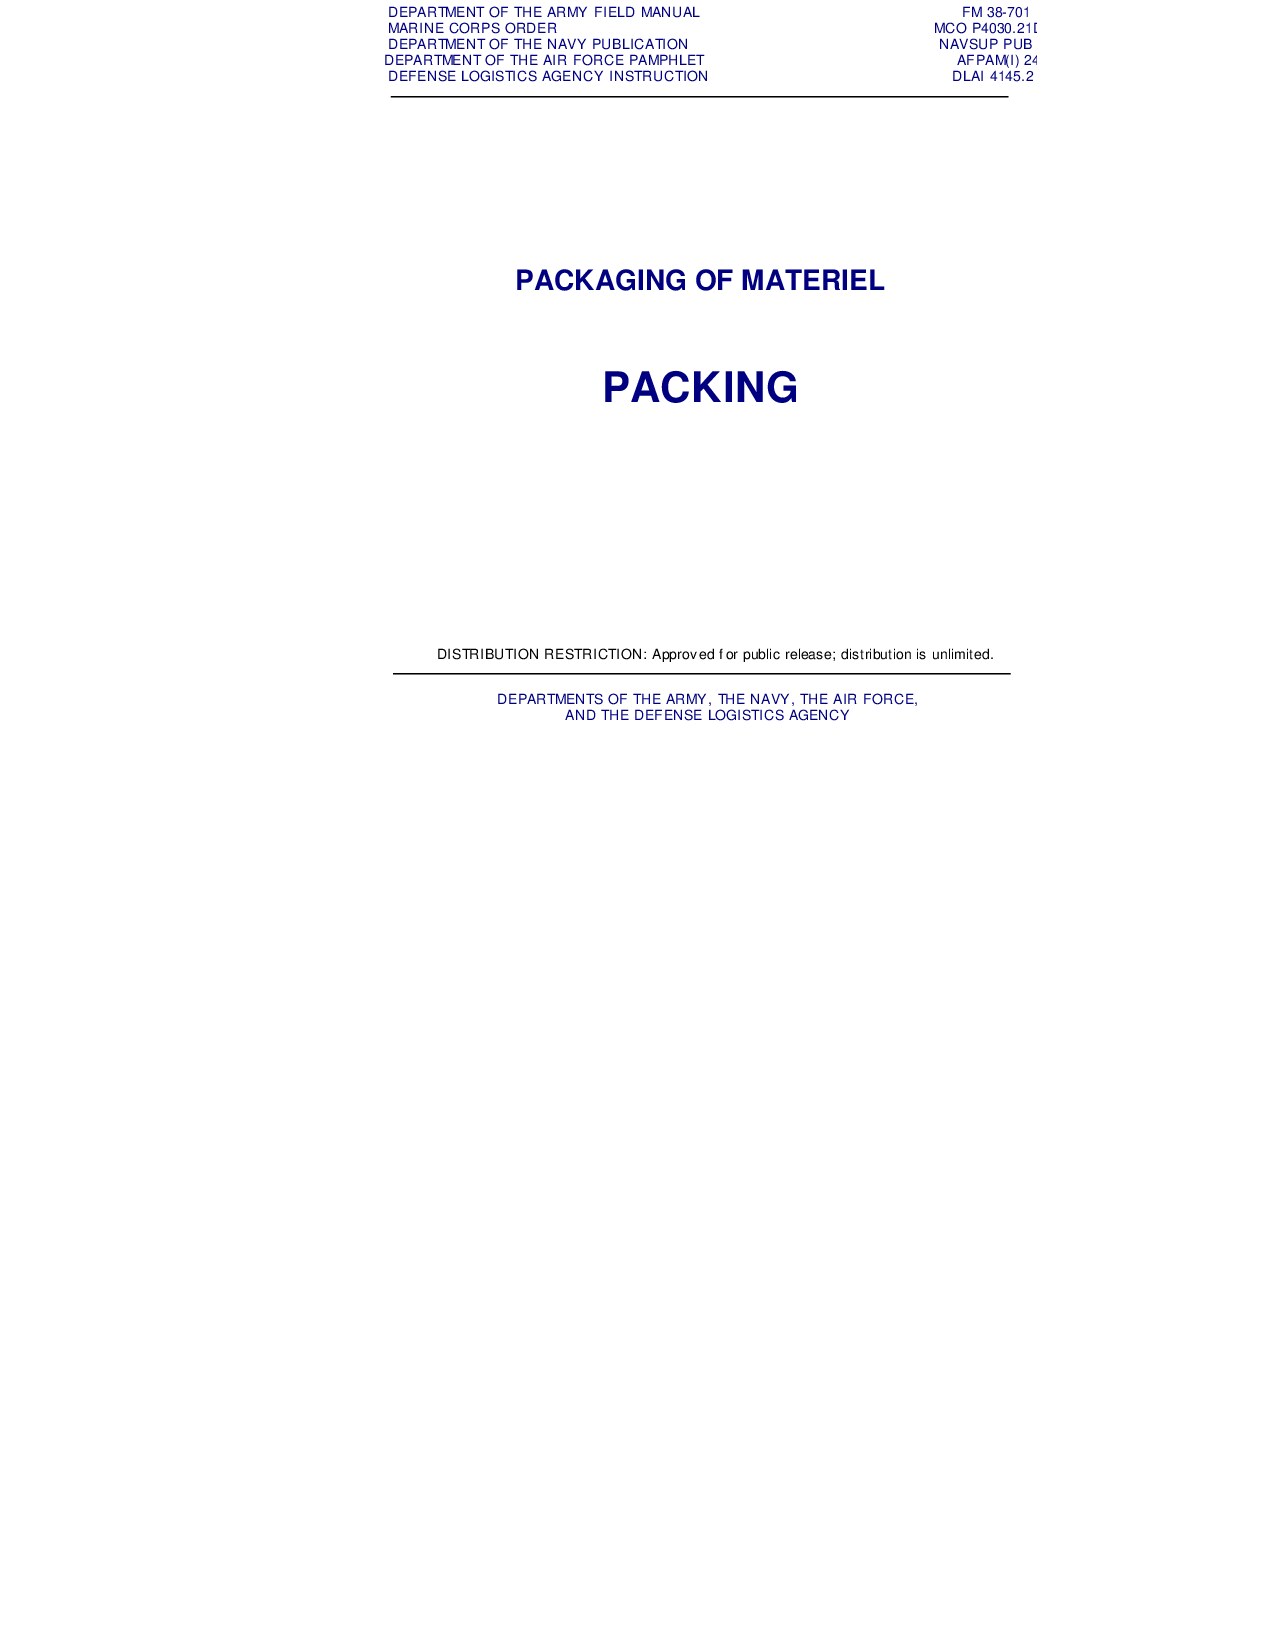 Packaging of Material - Packing